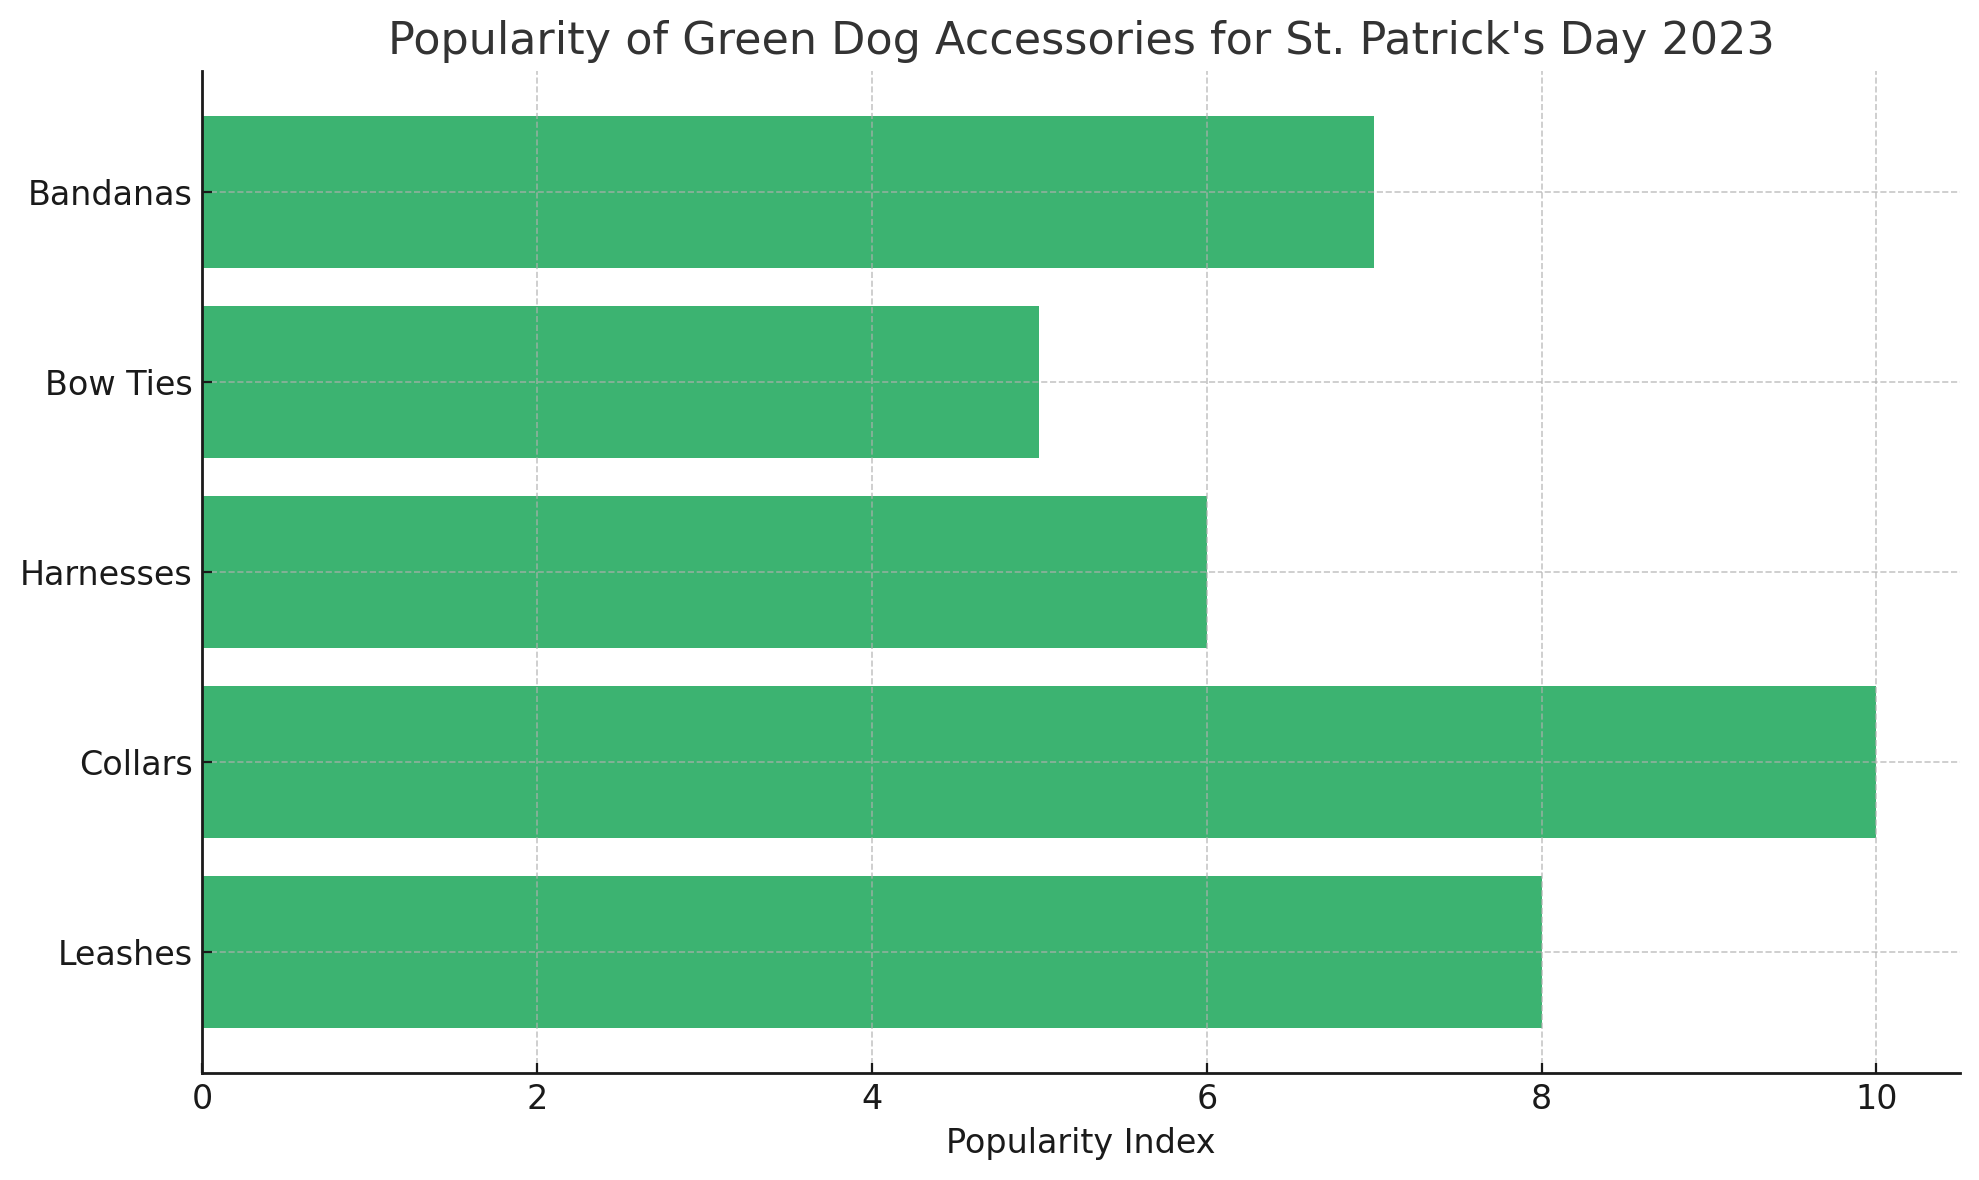 Data Visualization on Green Dog Accessories Popularity